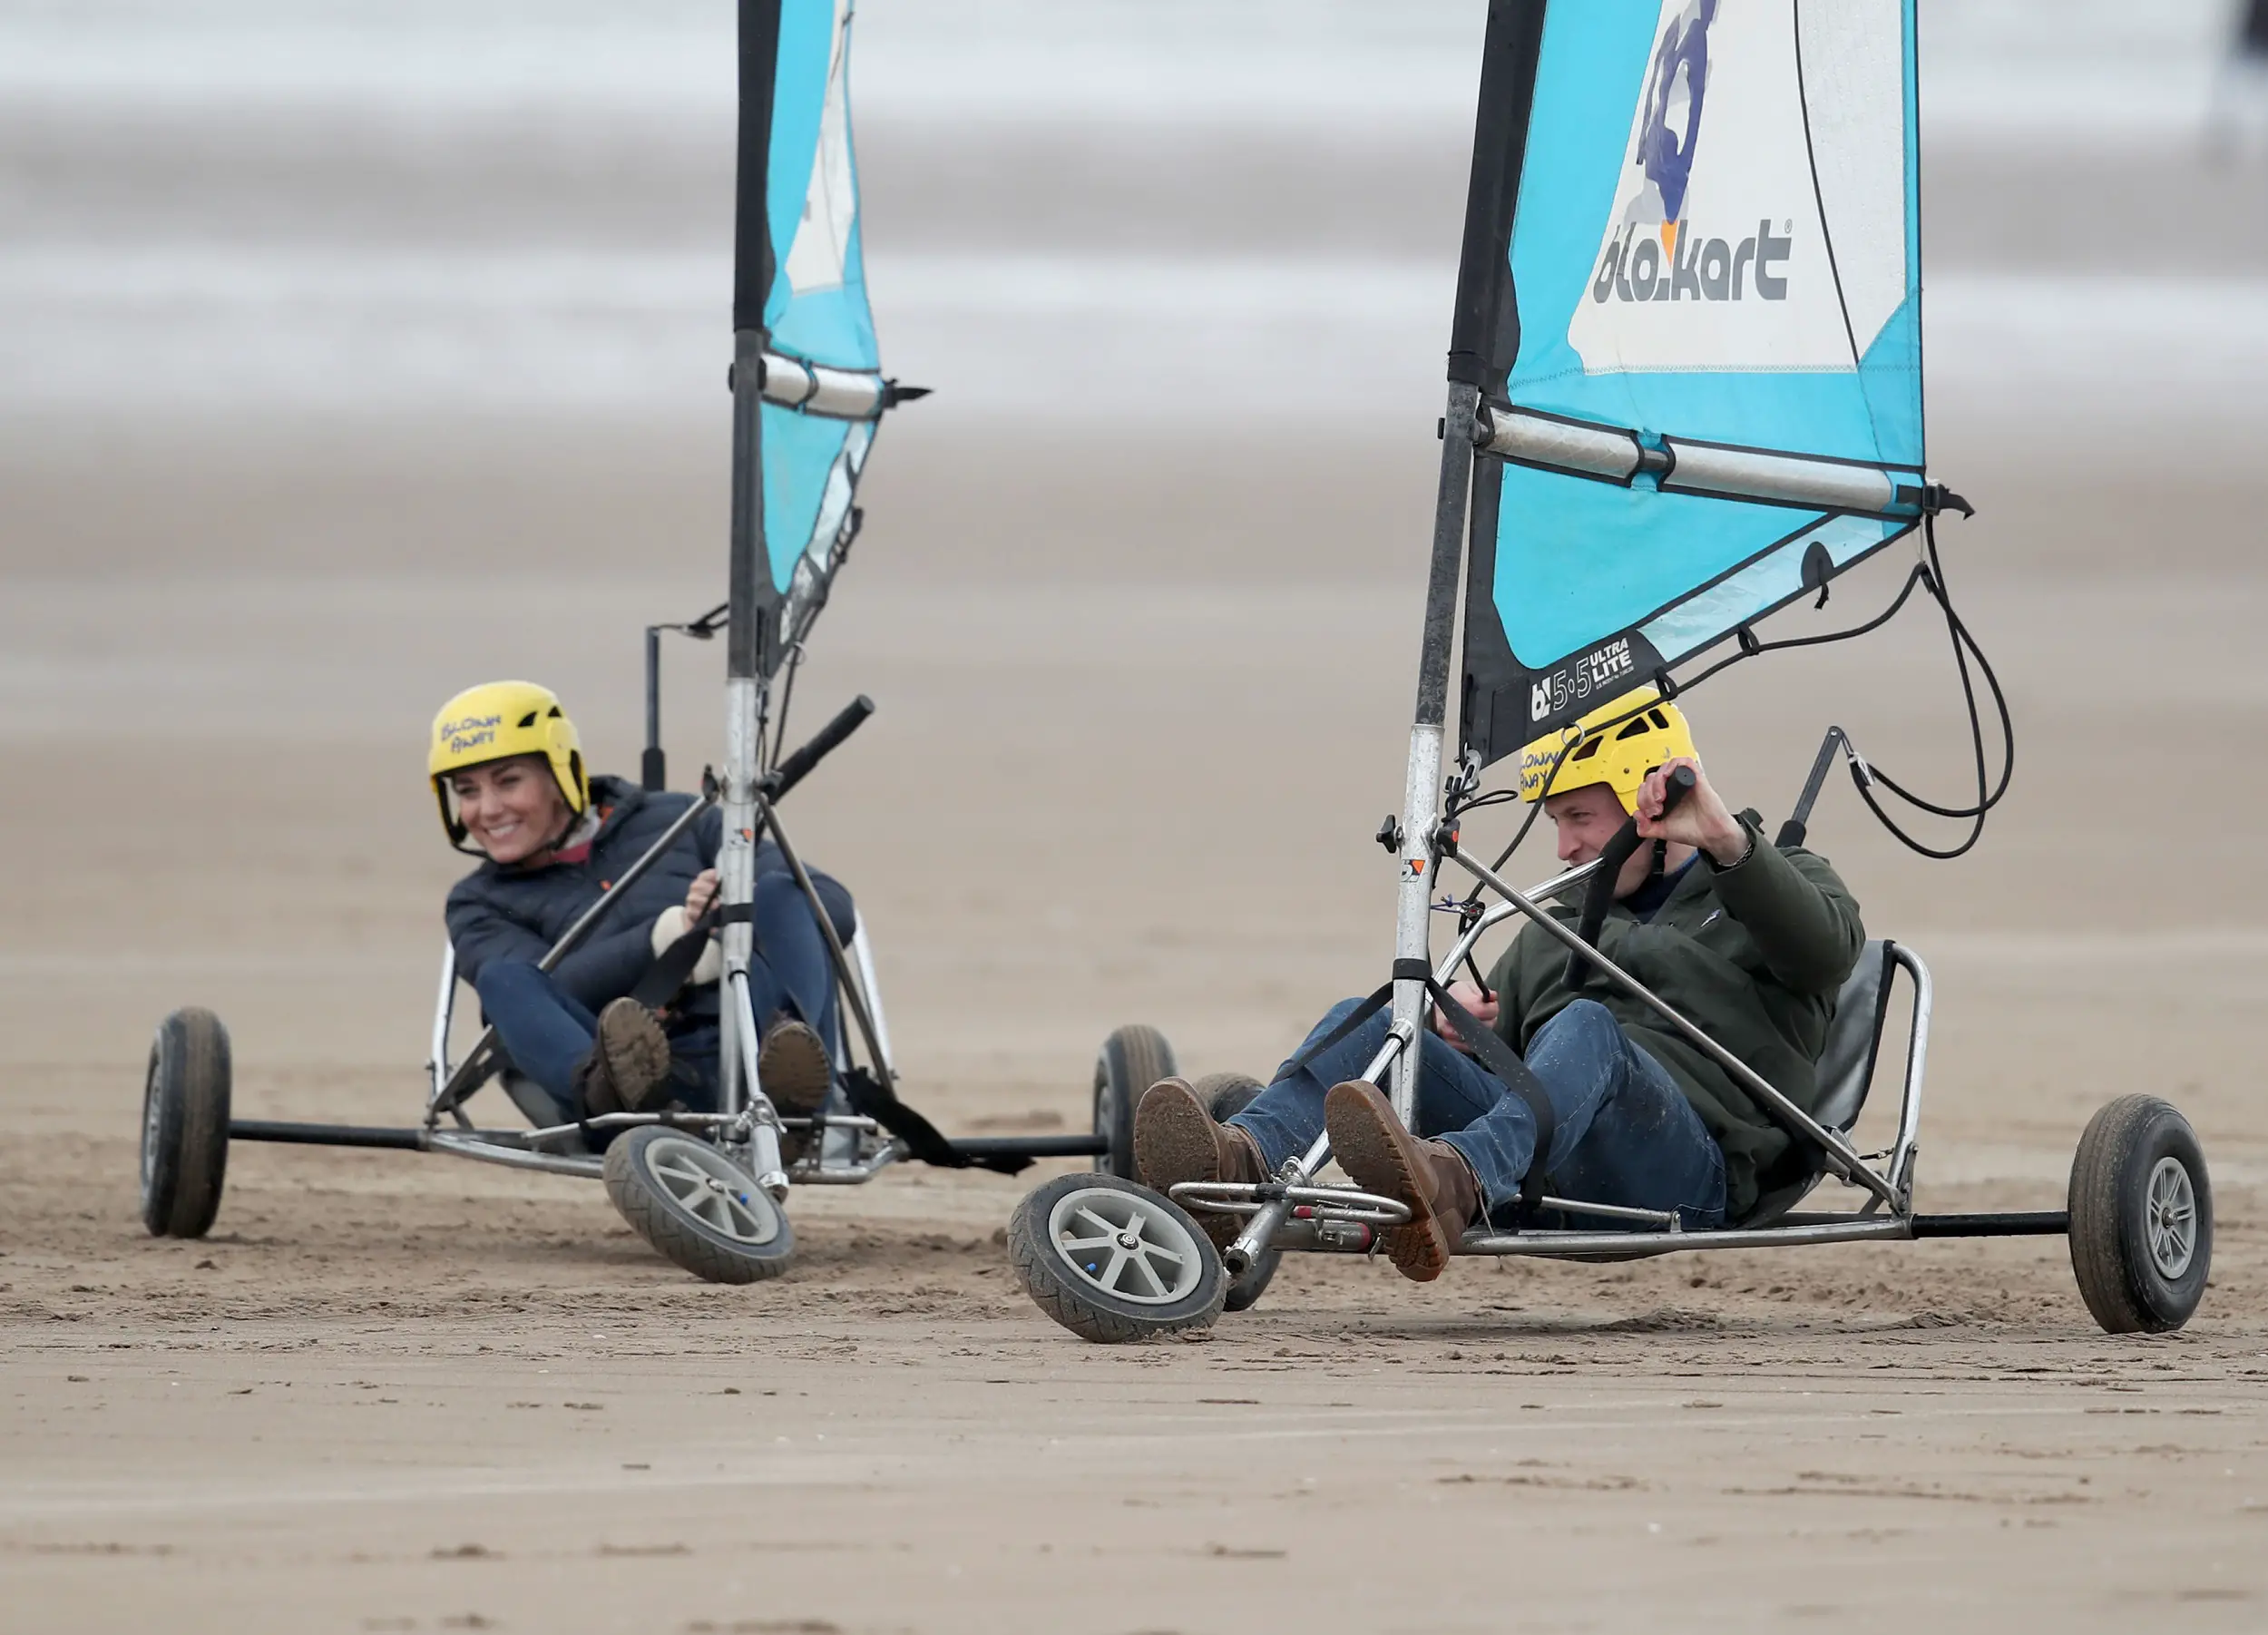 The Earl and Countess of Strathearn, as William and Catherine are styled in Scotland, had a fun start to the day with a land yachting competition on West Sands beach at St Andrews hosted by a local company, Blown Away